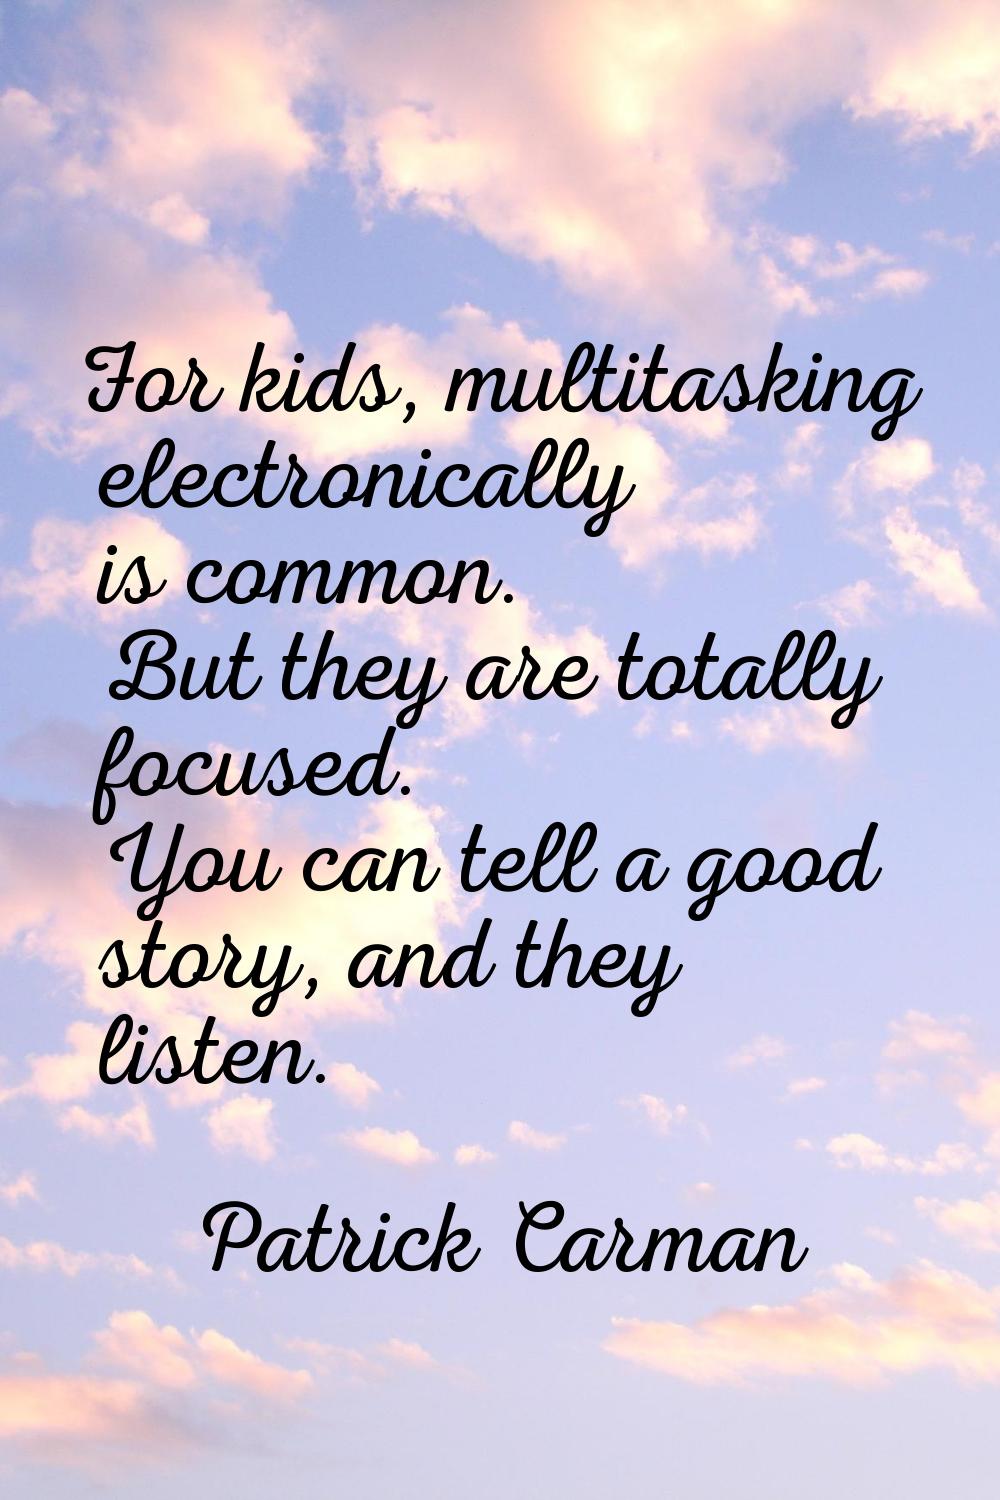 For kids, multitasking electronically is common. But they are totally focused. You can tell a good 